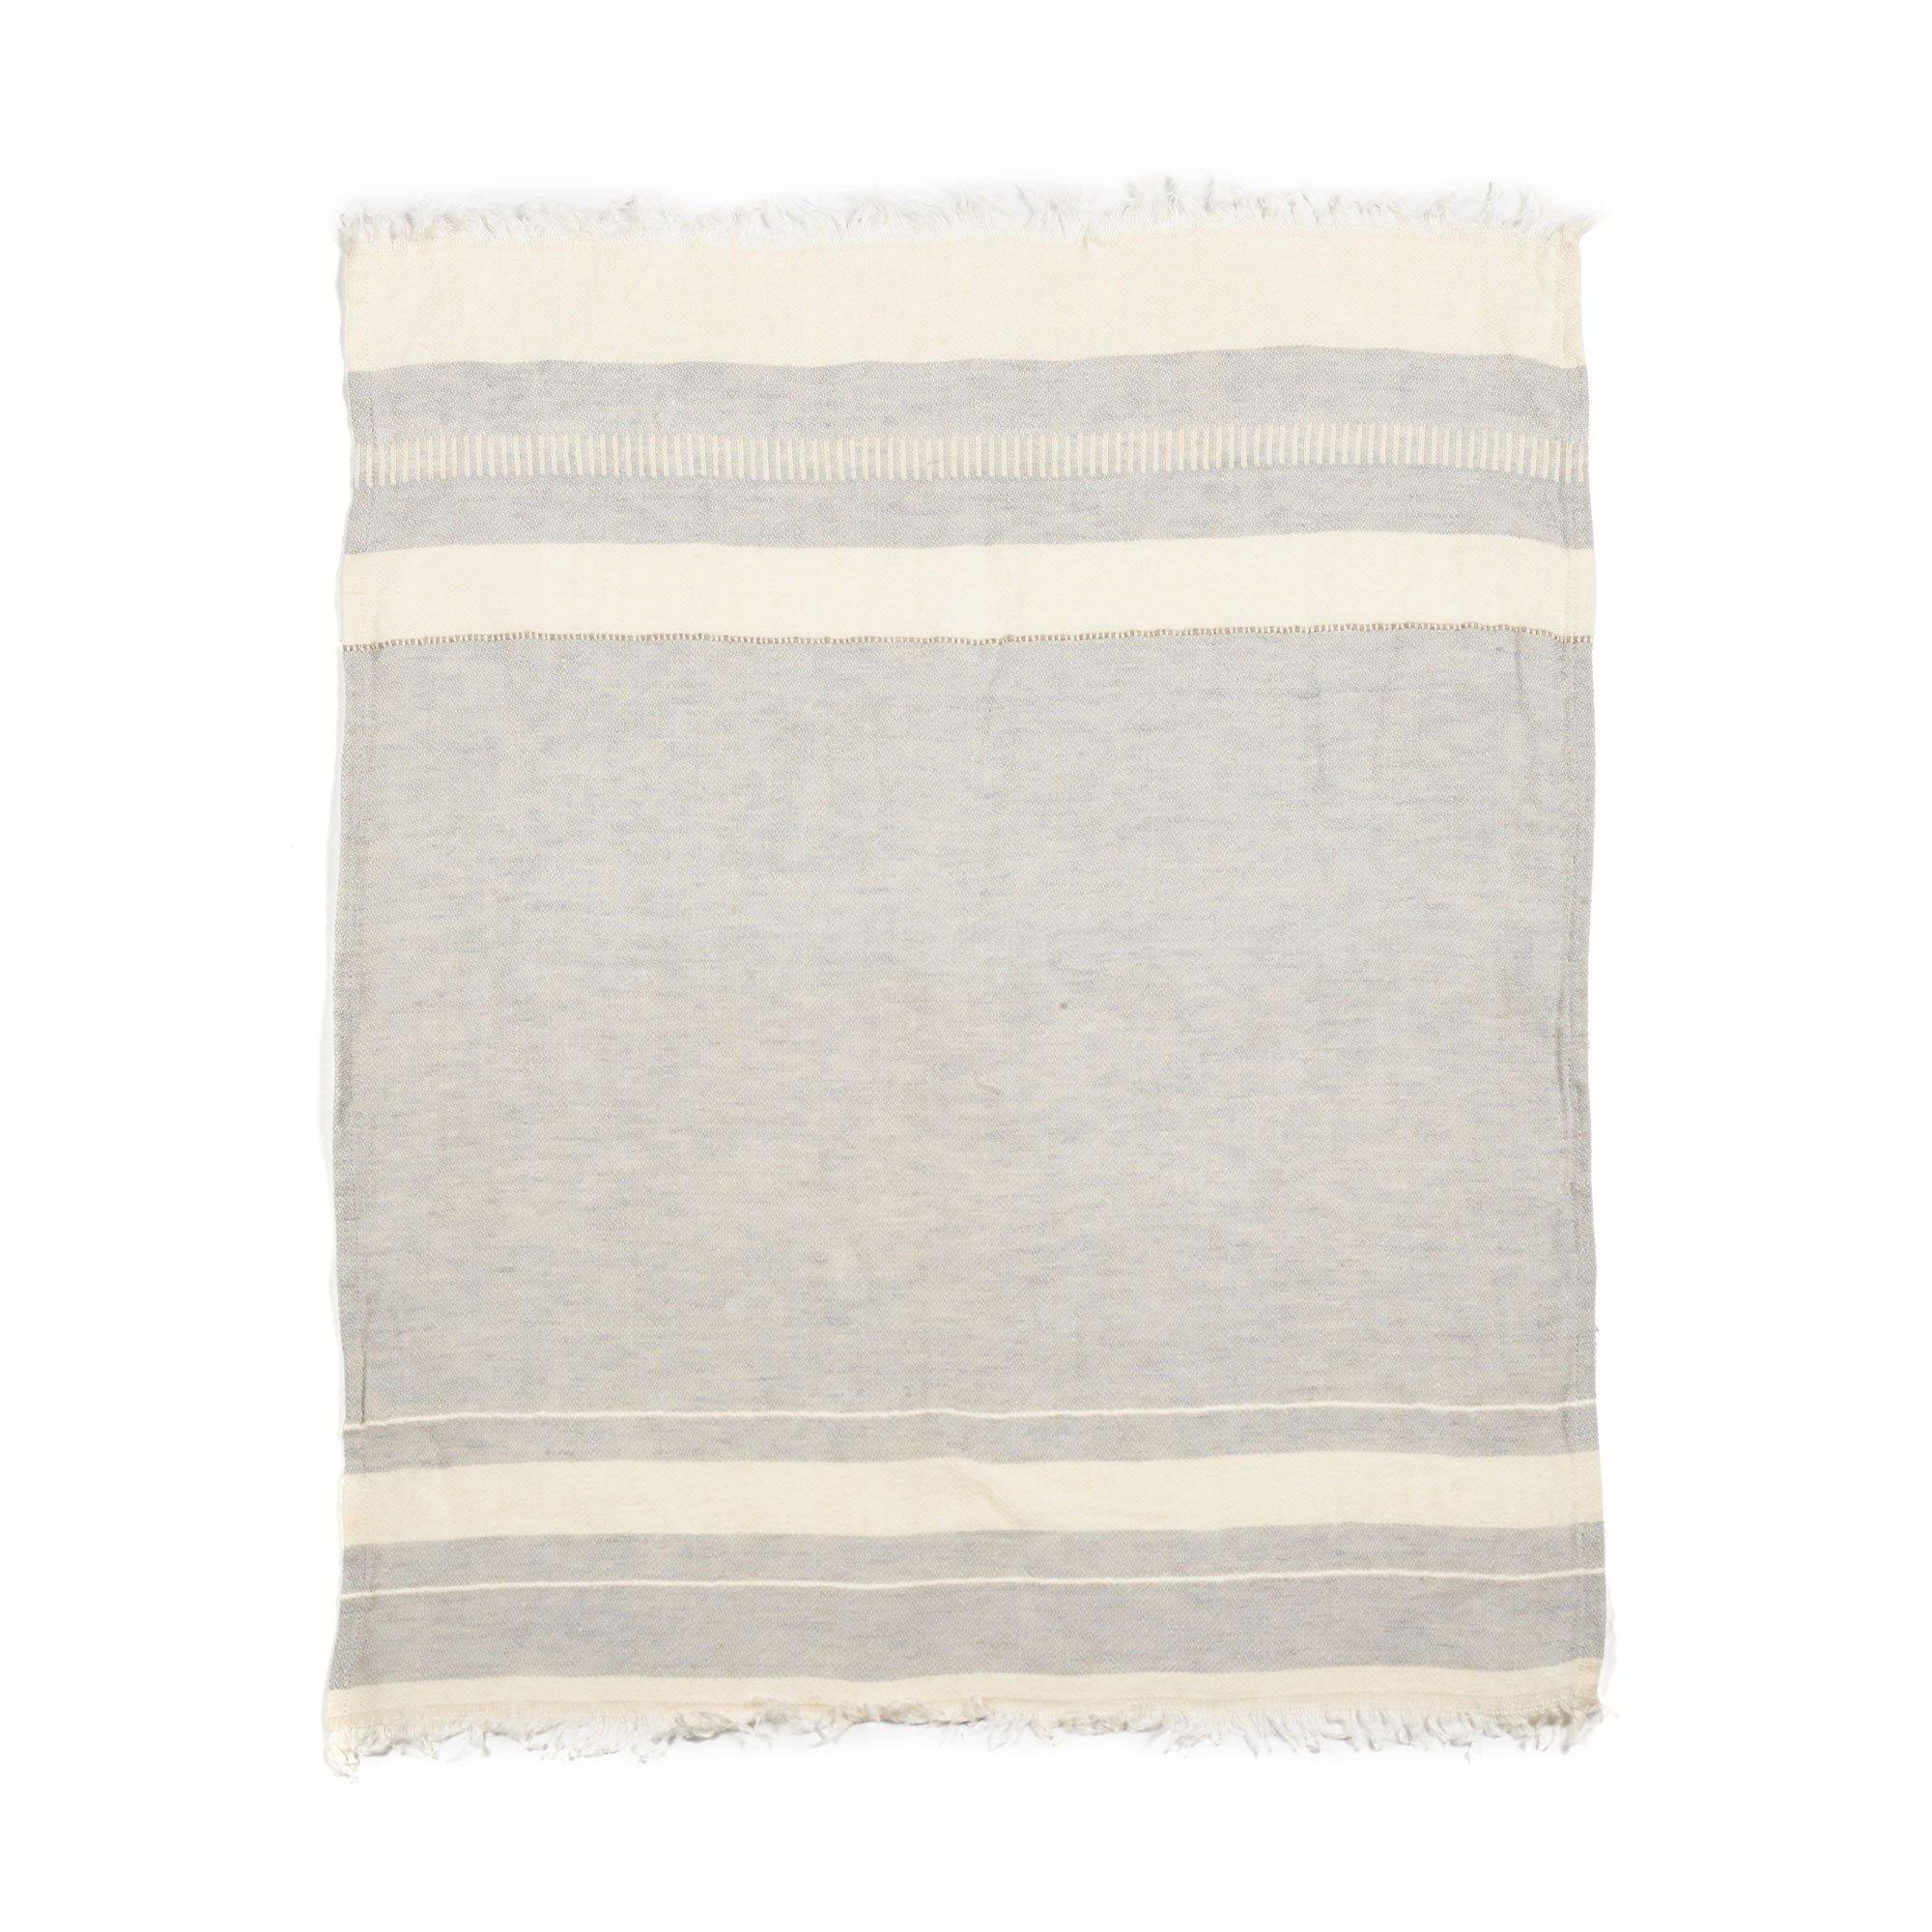 Belgian linen fouta throw blanket flat lay product shot in color Gent Stripe by Libeco for South Hous.